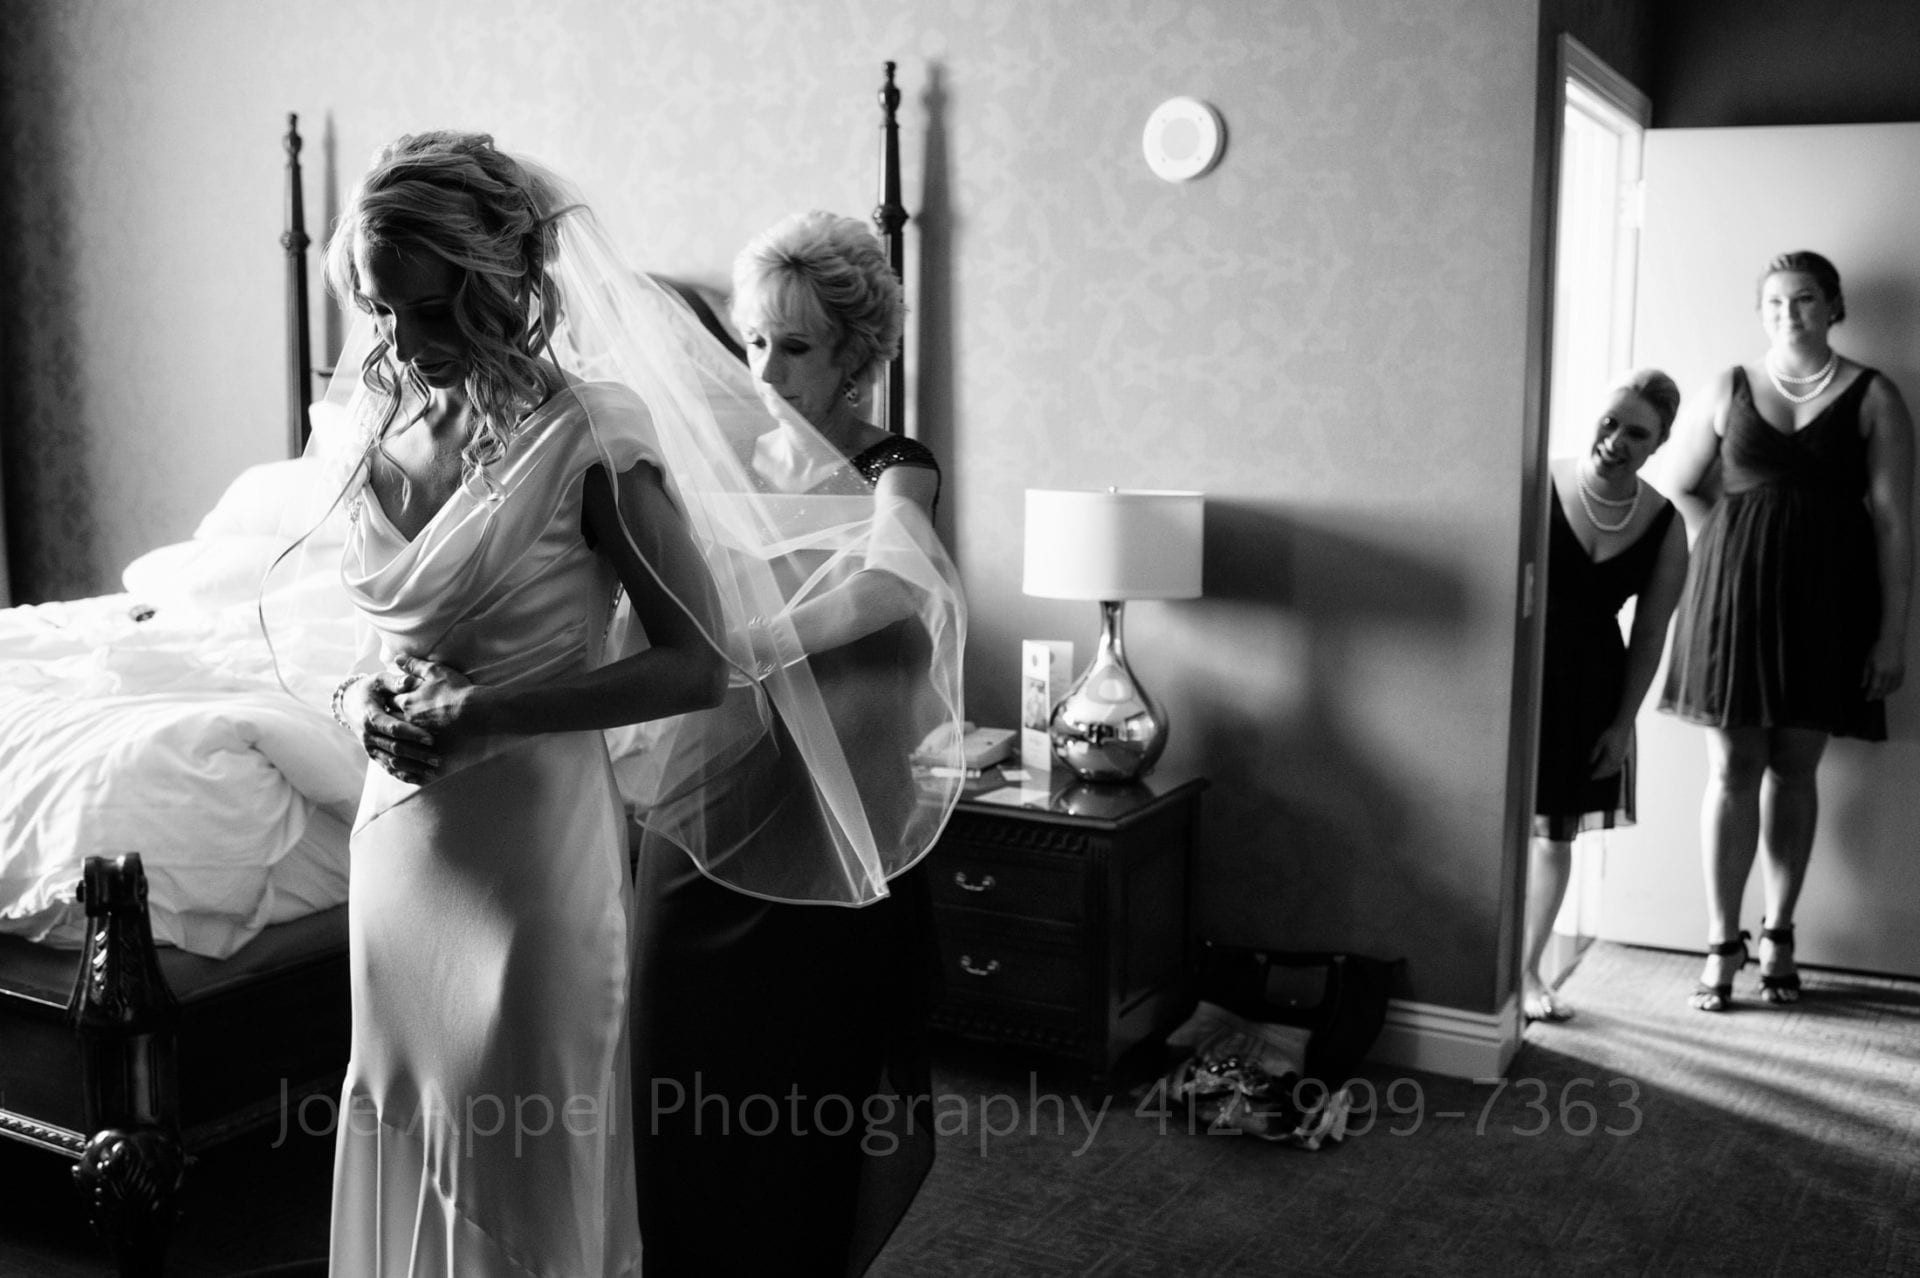 two bridesmaids smile and watch a brides mother button her wedding dress